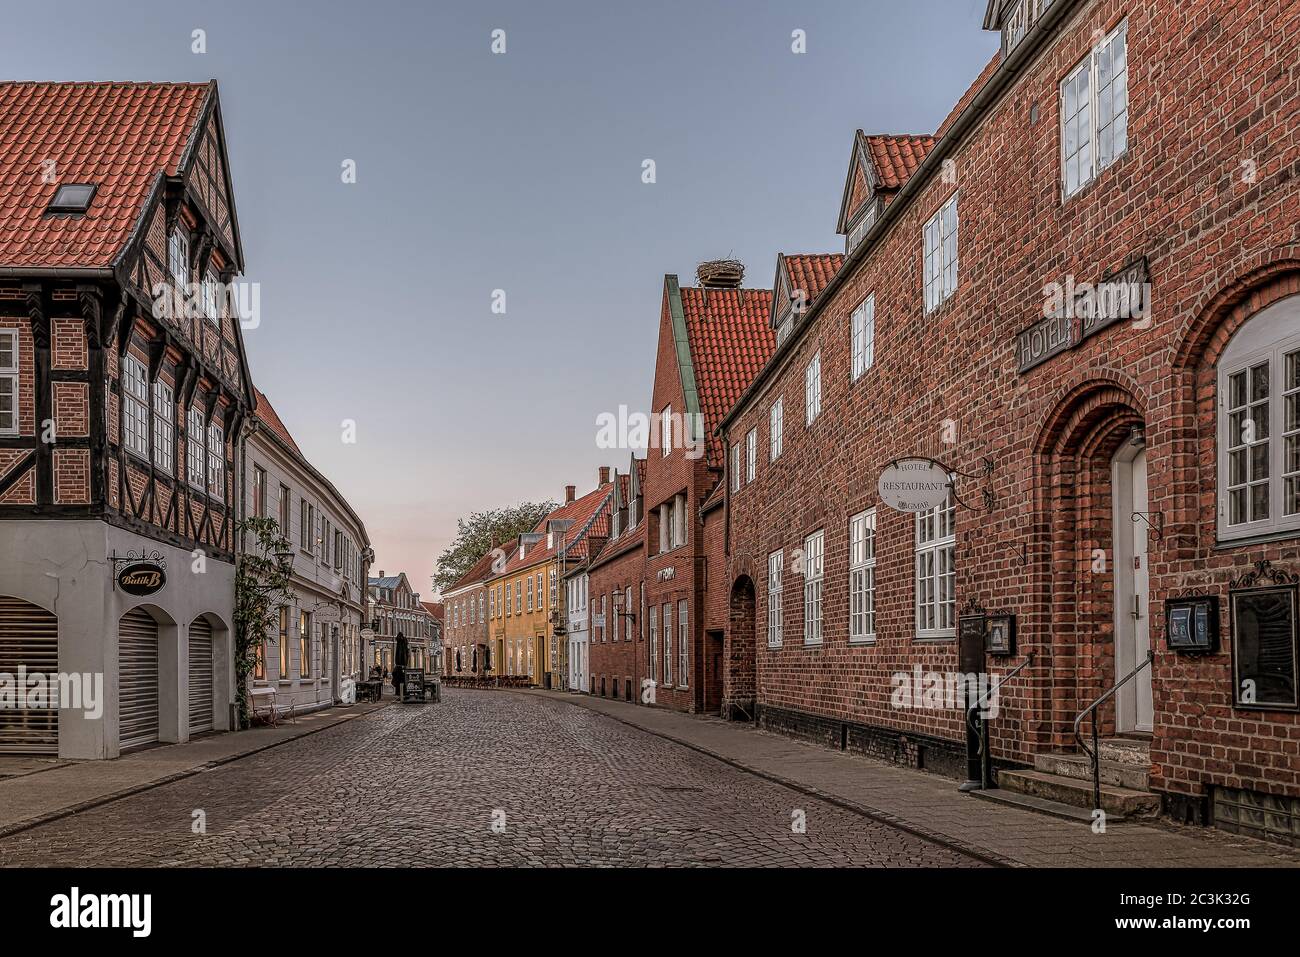 An old cobbled street in the medieval town of Ribe, Denmark, May 29, 2020 Stock Photo